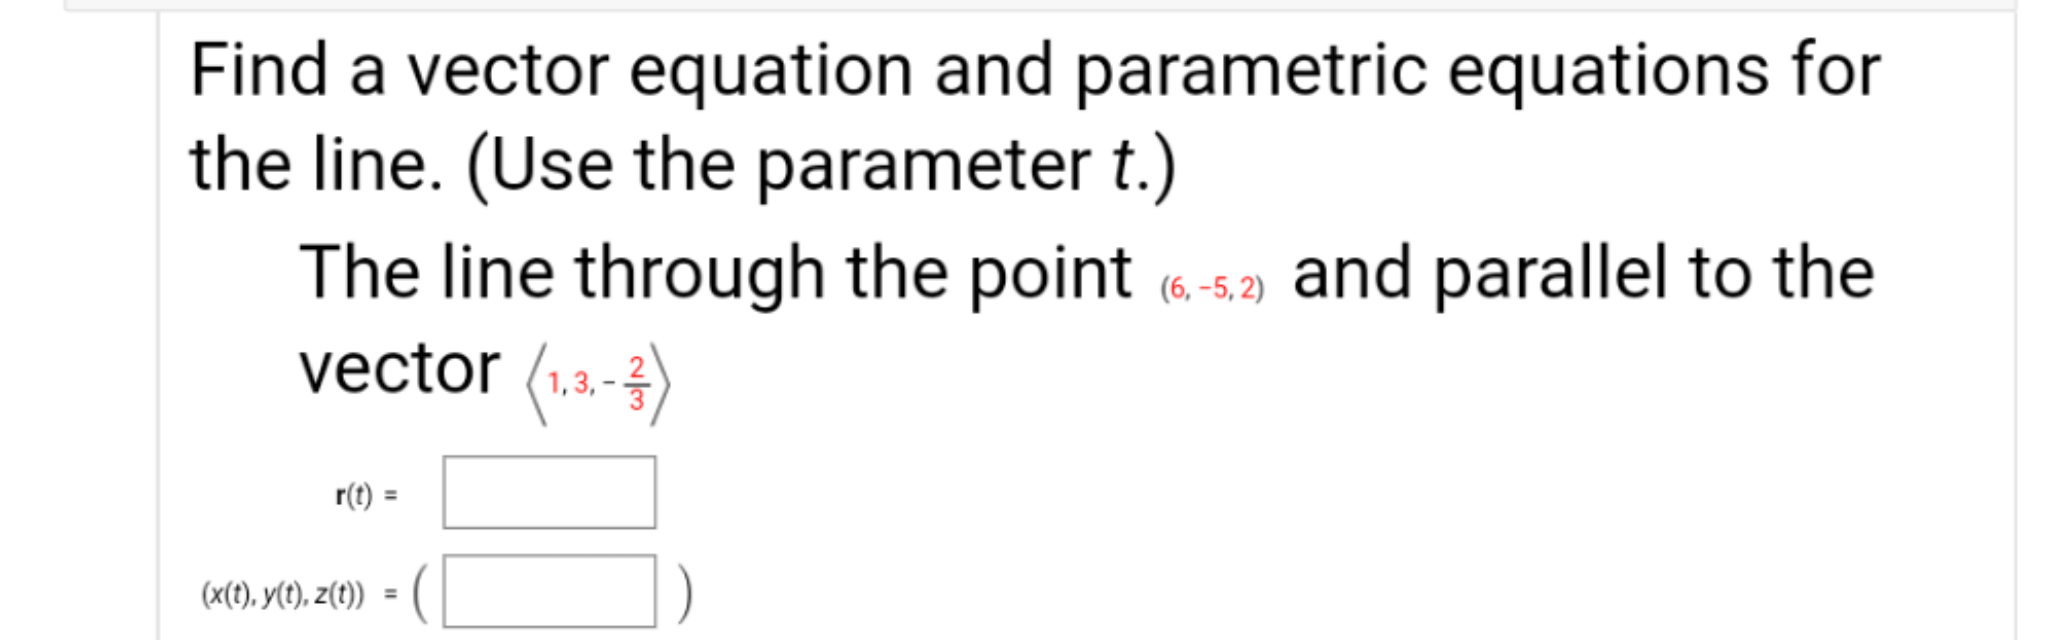 Find a vector equation and parametric equations for
the line. (Use the parameter t.)
The line through the point (6 -5.) and parallel to the
vector (1.3.-3)
r(t)
%3D
(x(t), v(t), zít)
